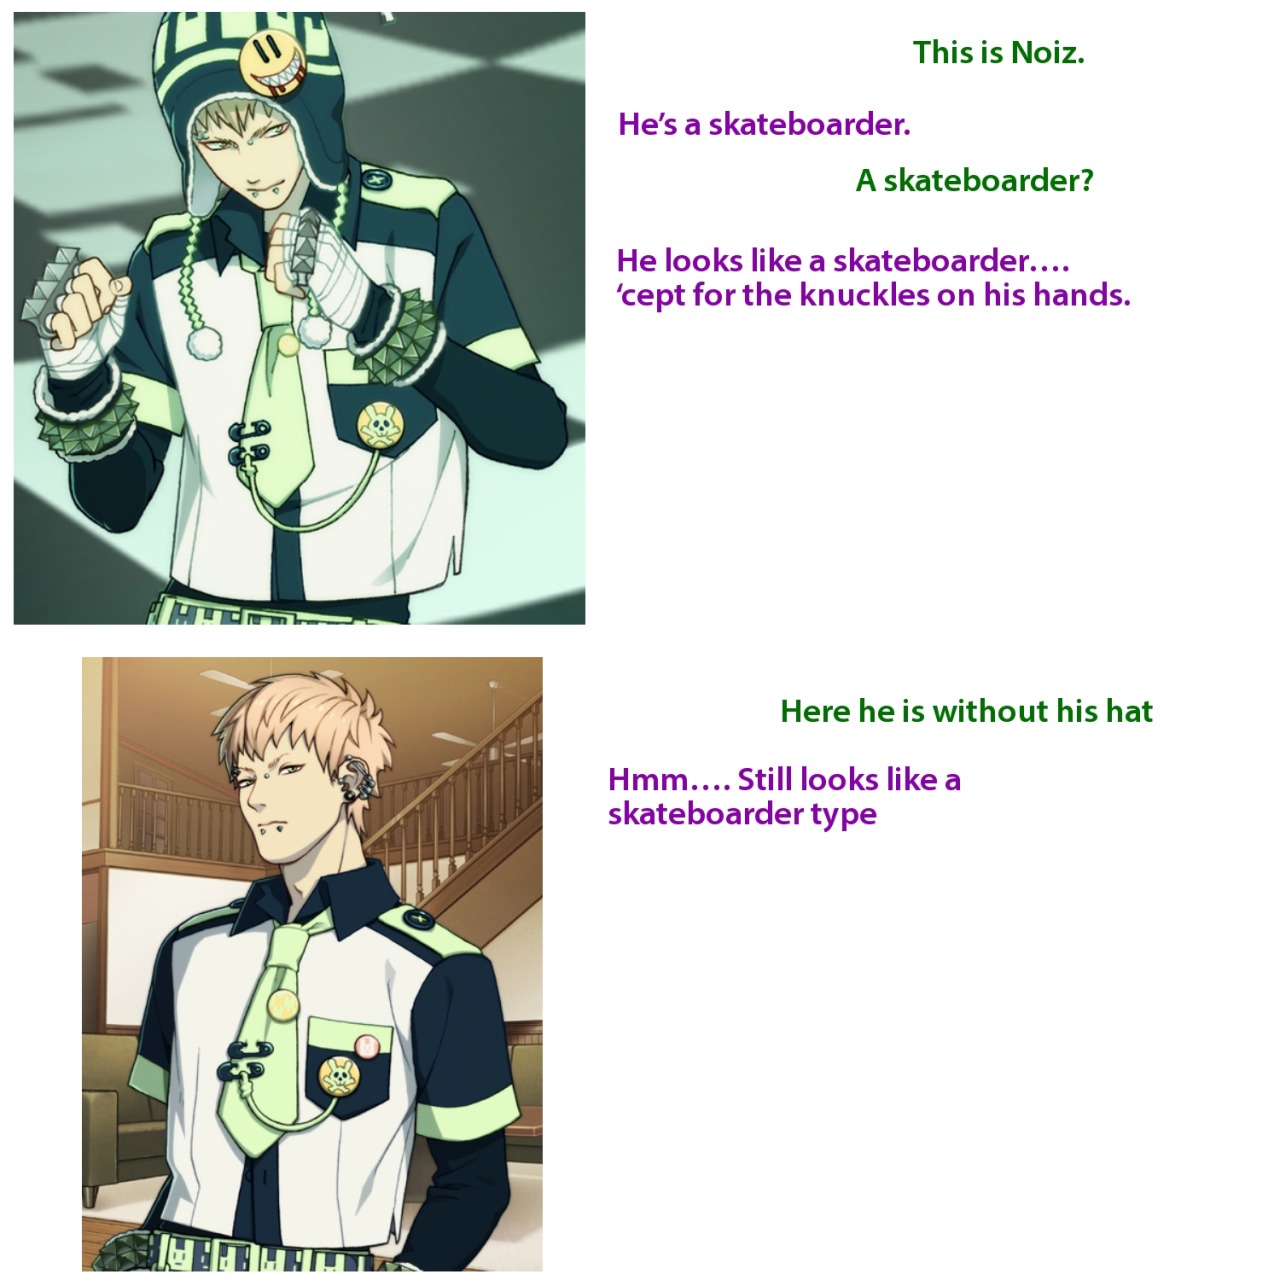 sweetmelonkandy:  hot-gothics:  DRAMAtical Murder First Impressions with my mom I